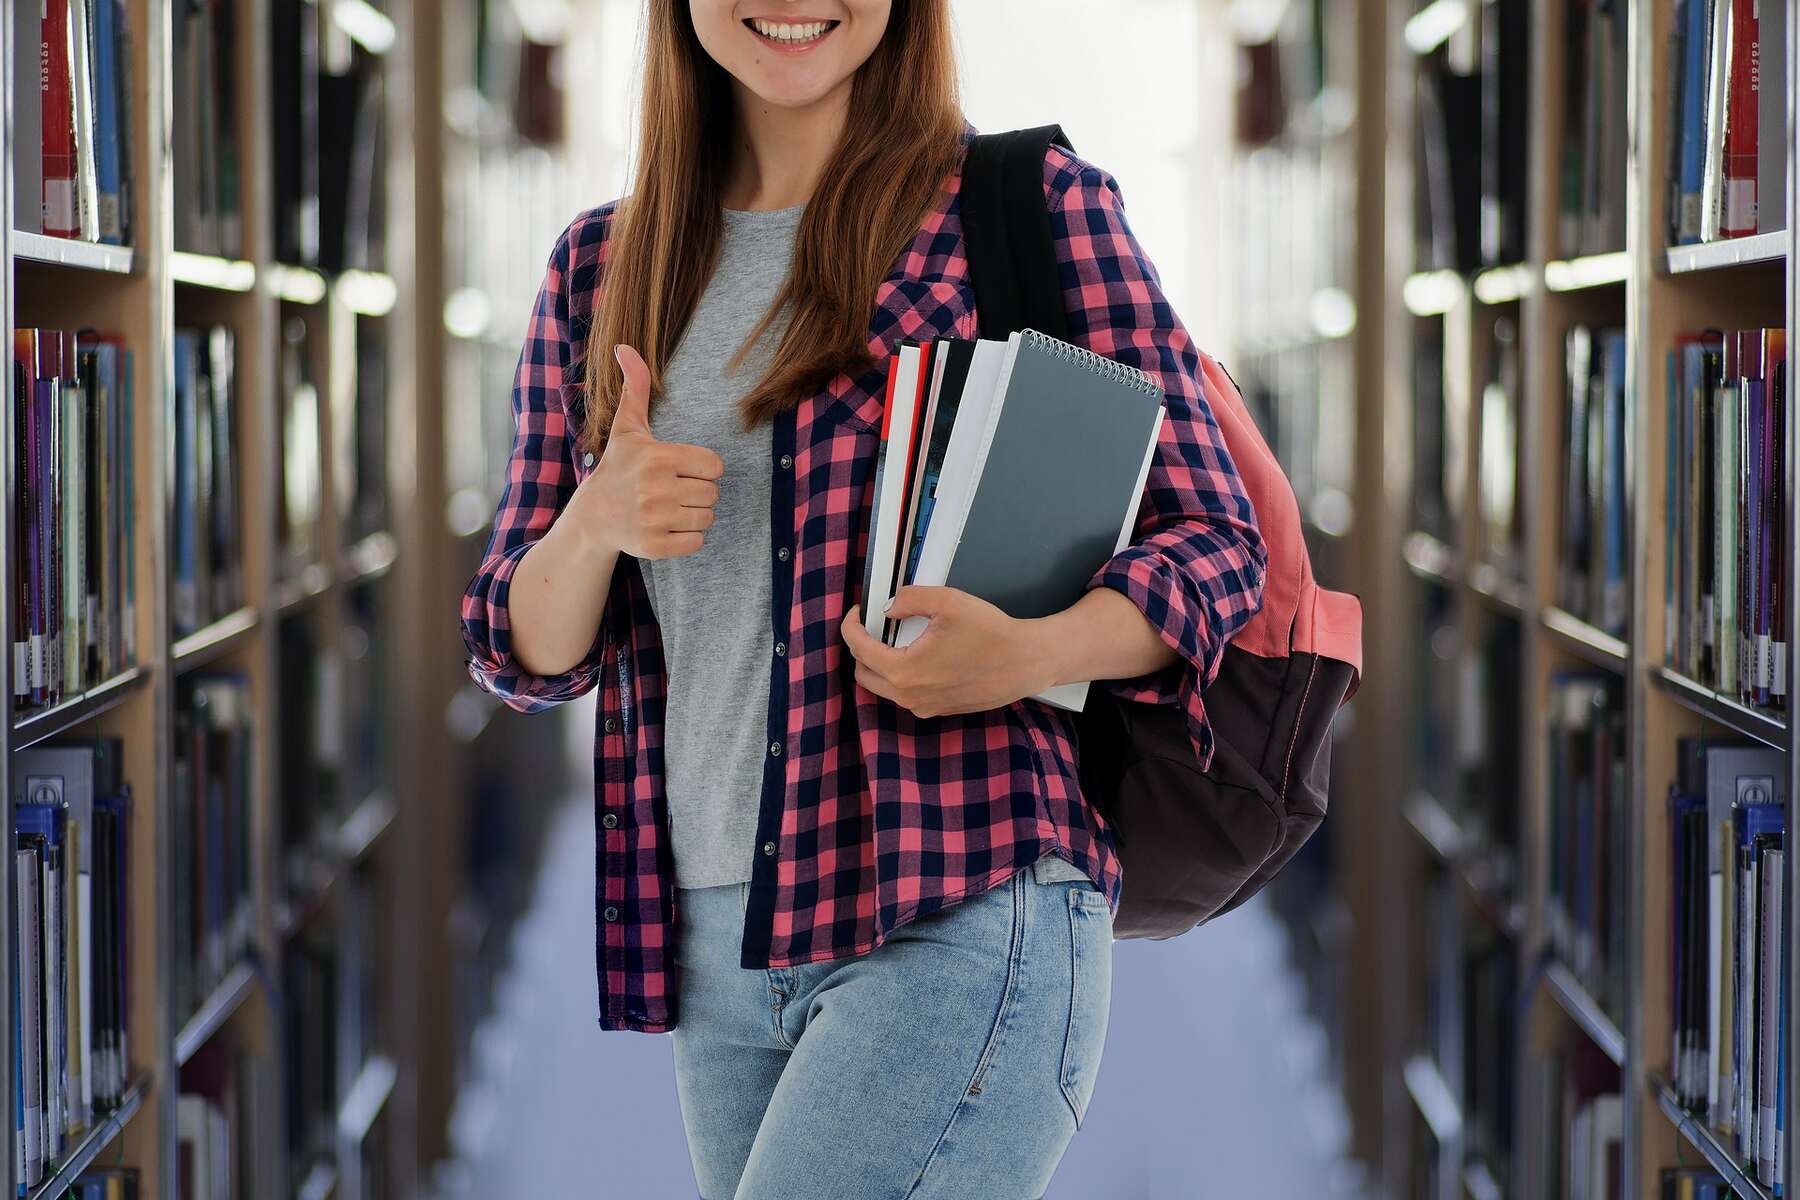 A young woman in a library, holding books and a backpack